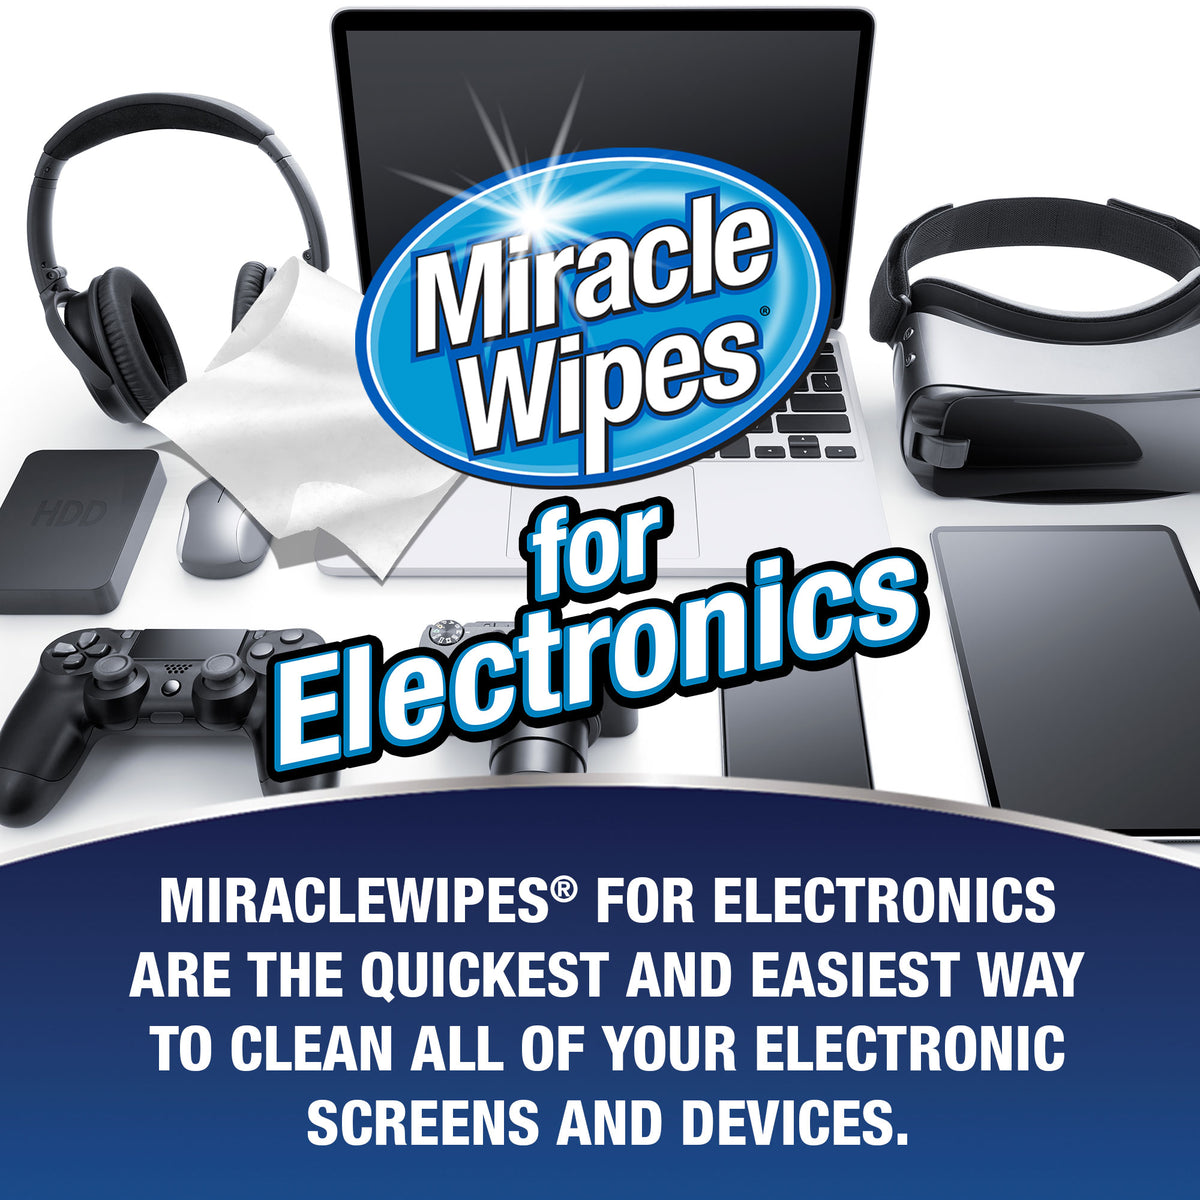 MiracleWipes for Electronics – Miracle Brands